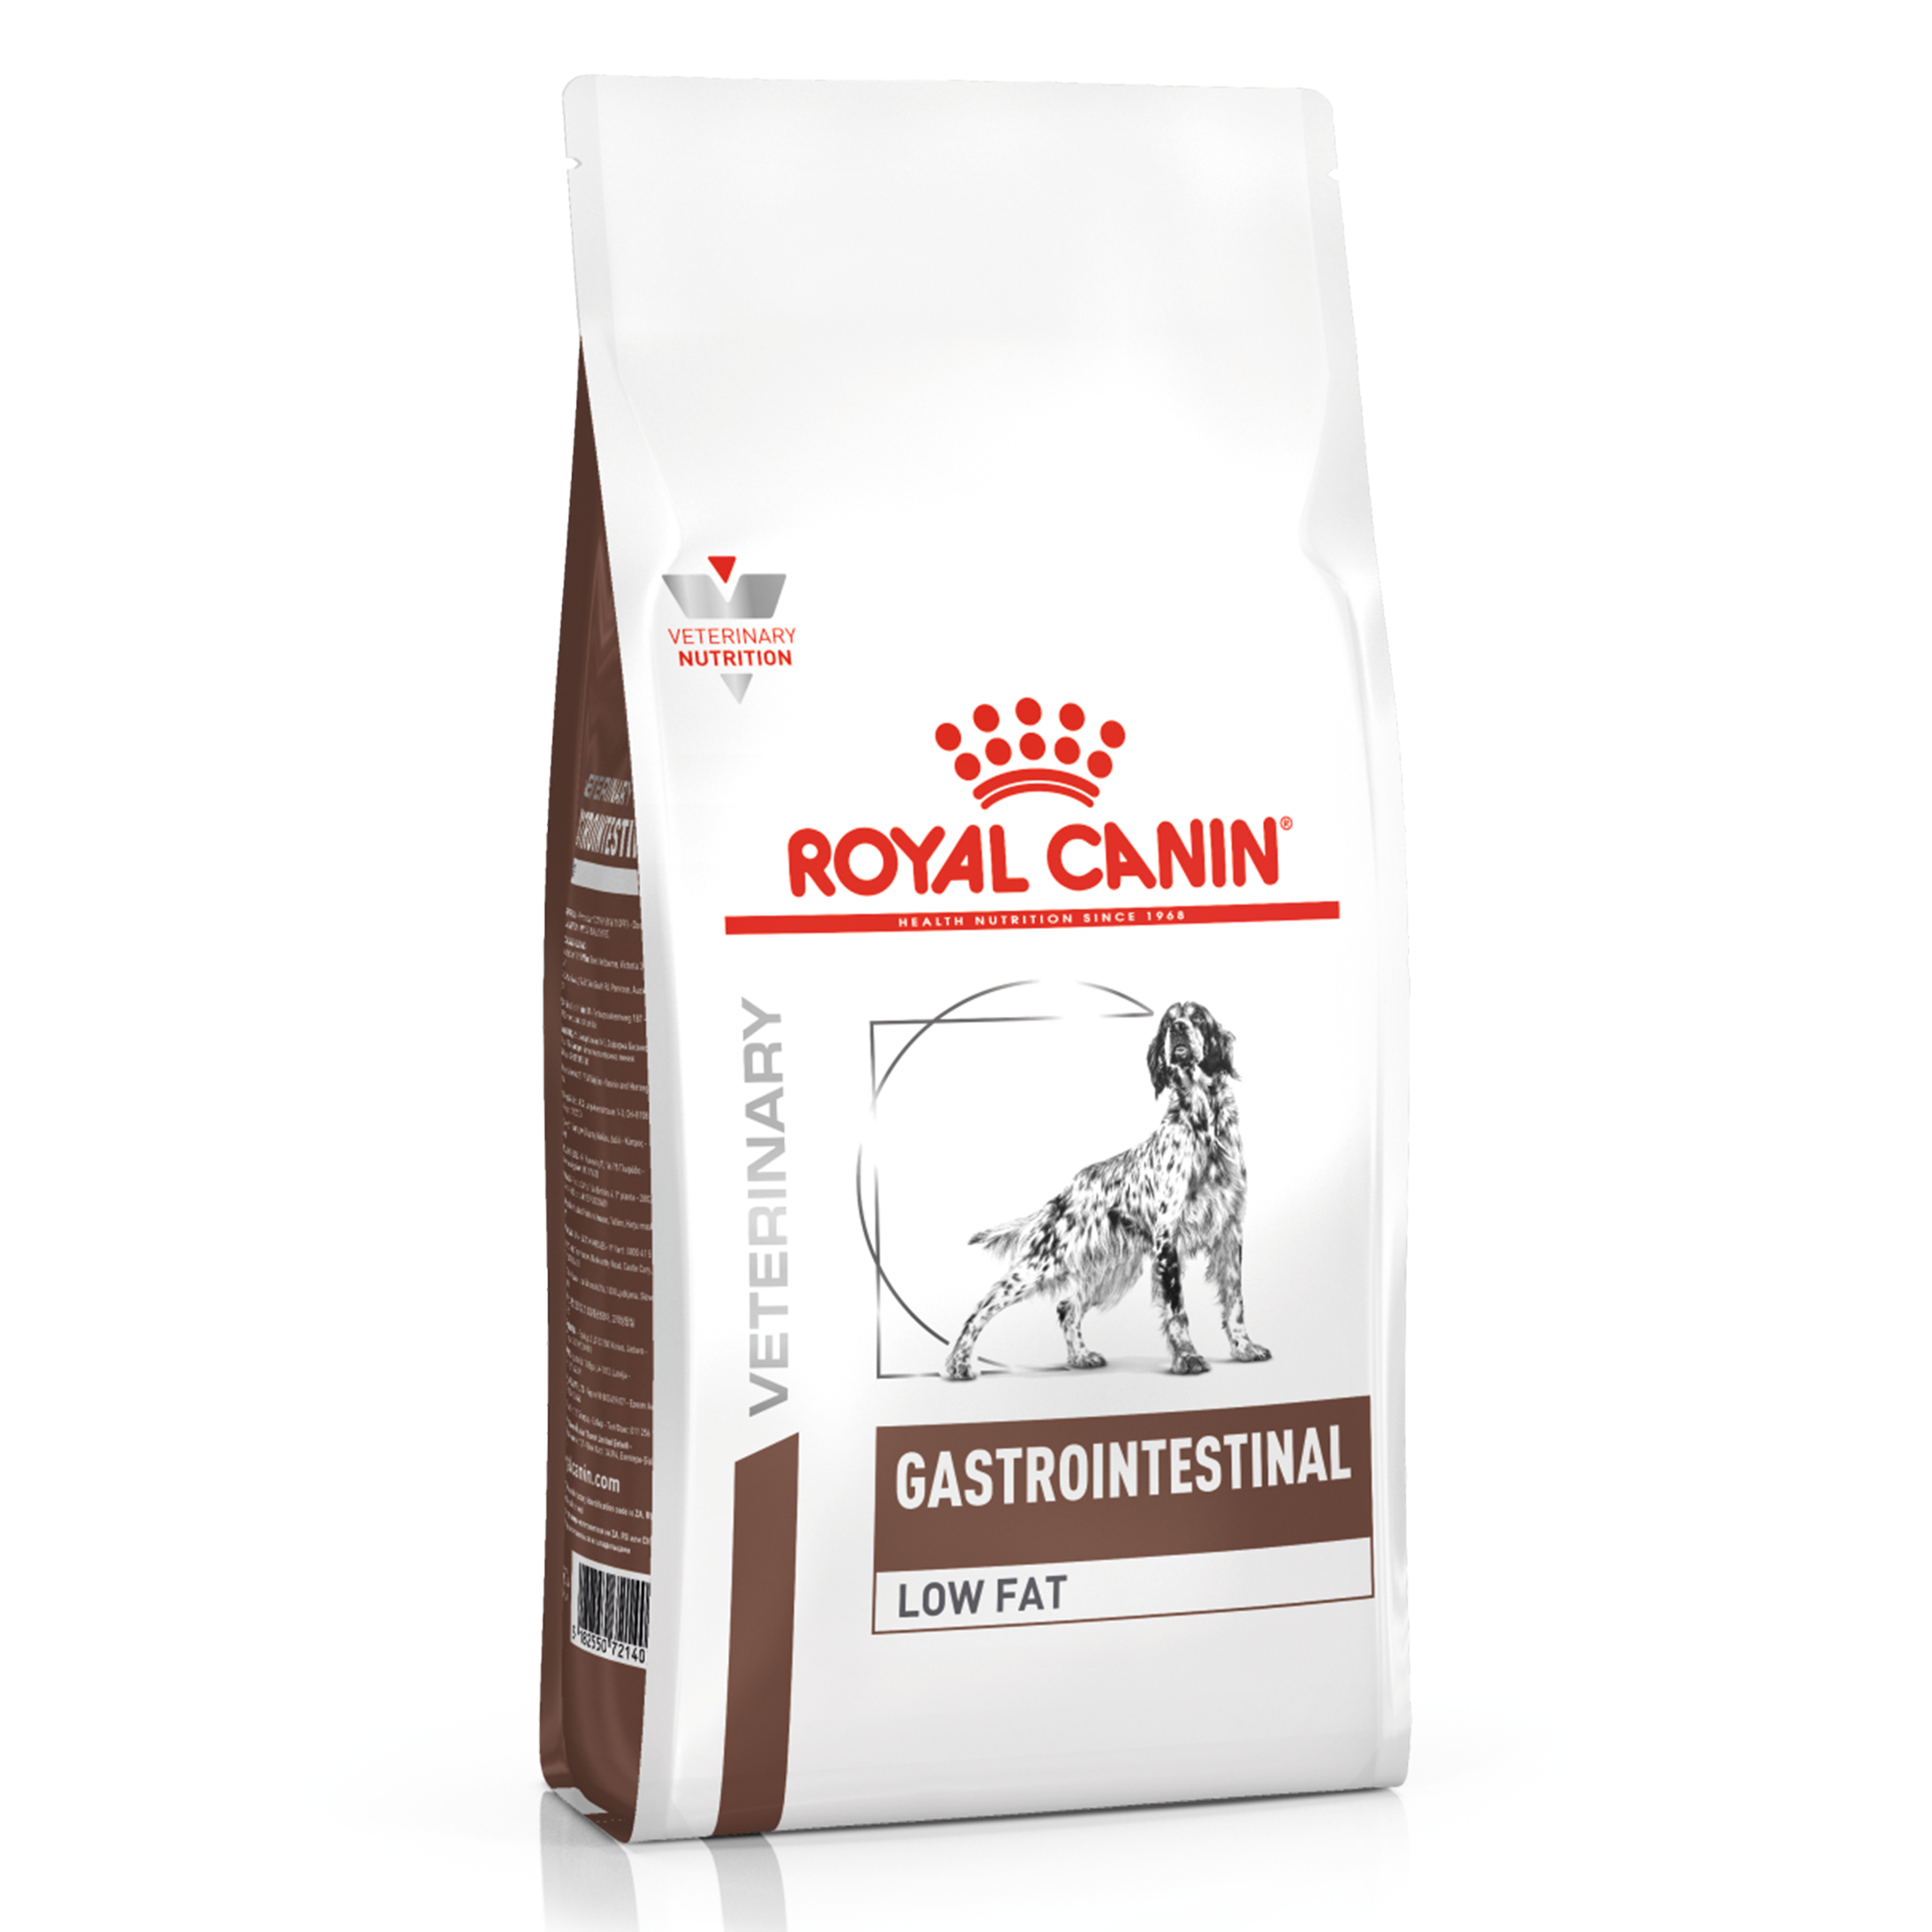 Royal Canin Gastro intestinal Low Fat Canine (1.5 KG) – Dry food for Gastro-intestinal disorders